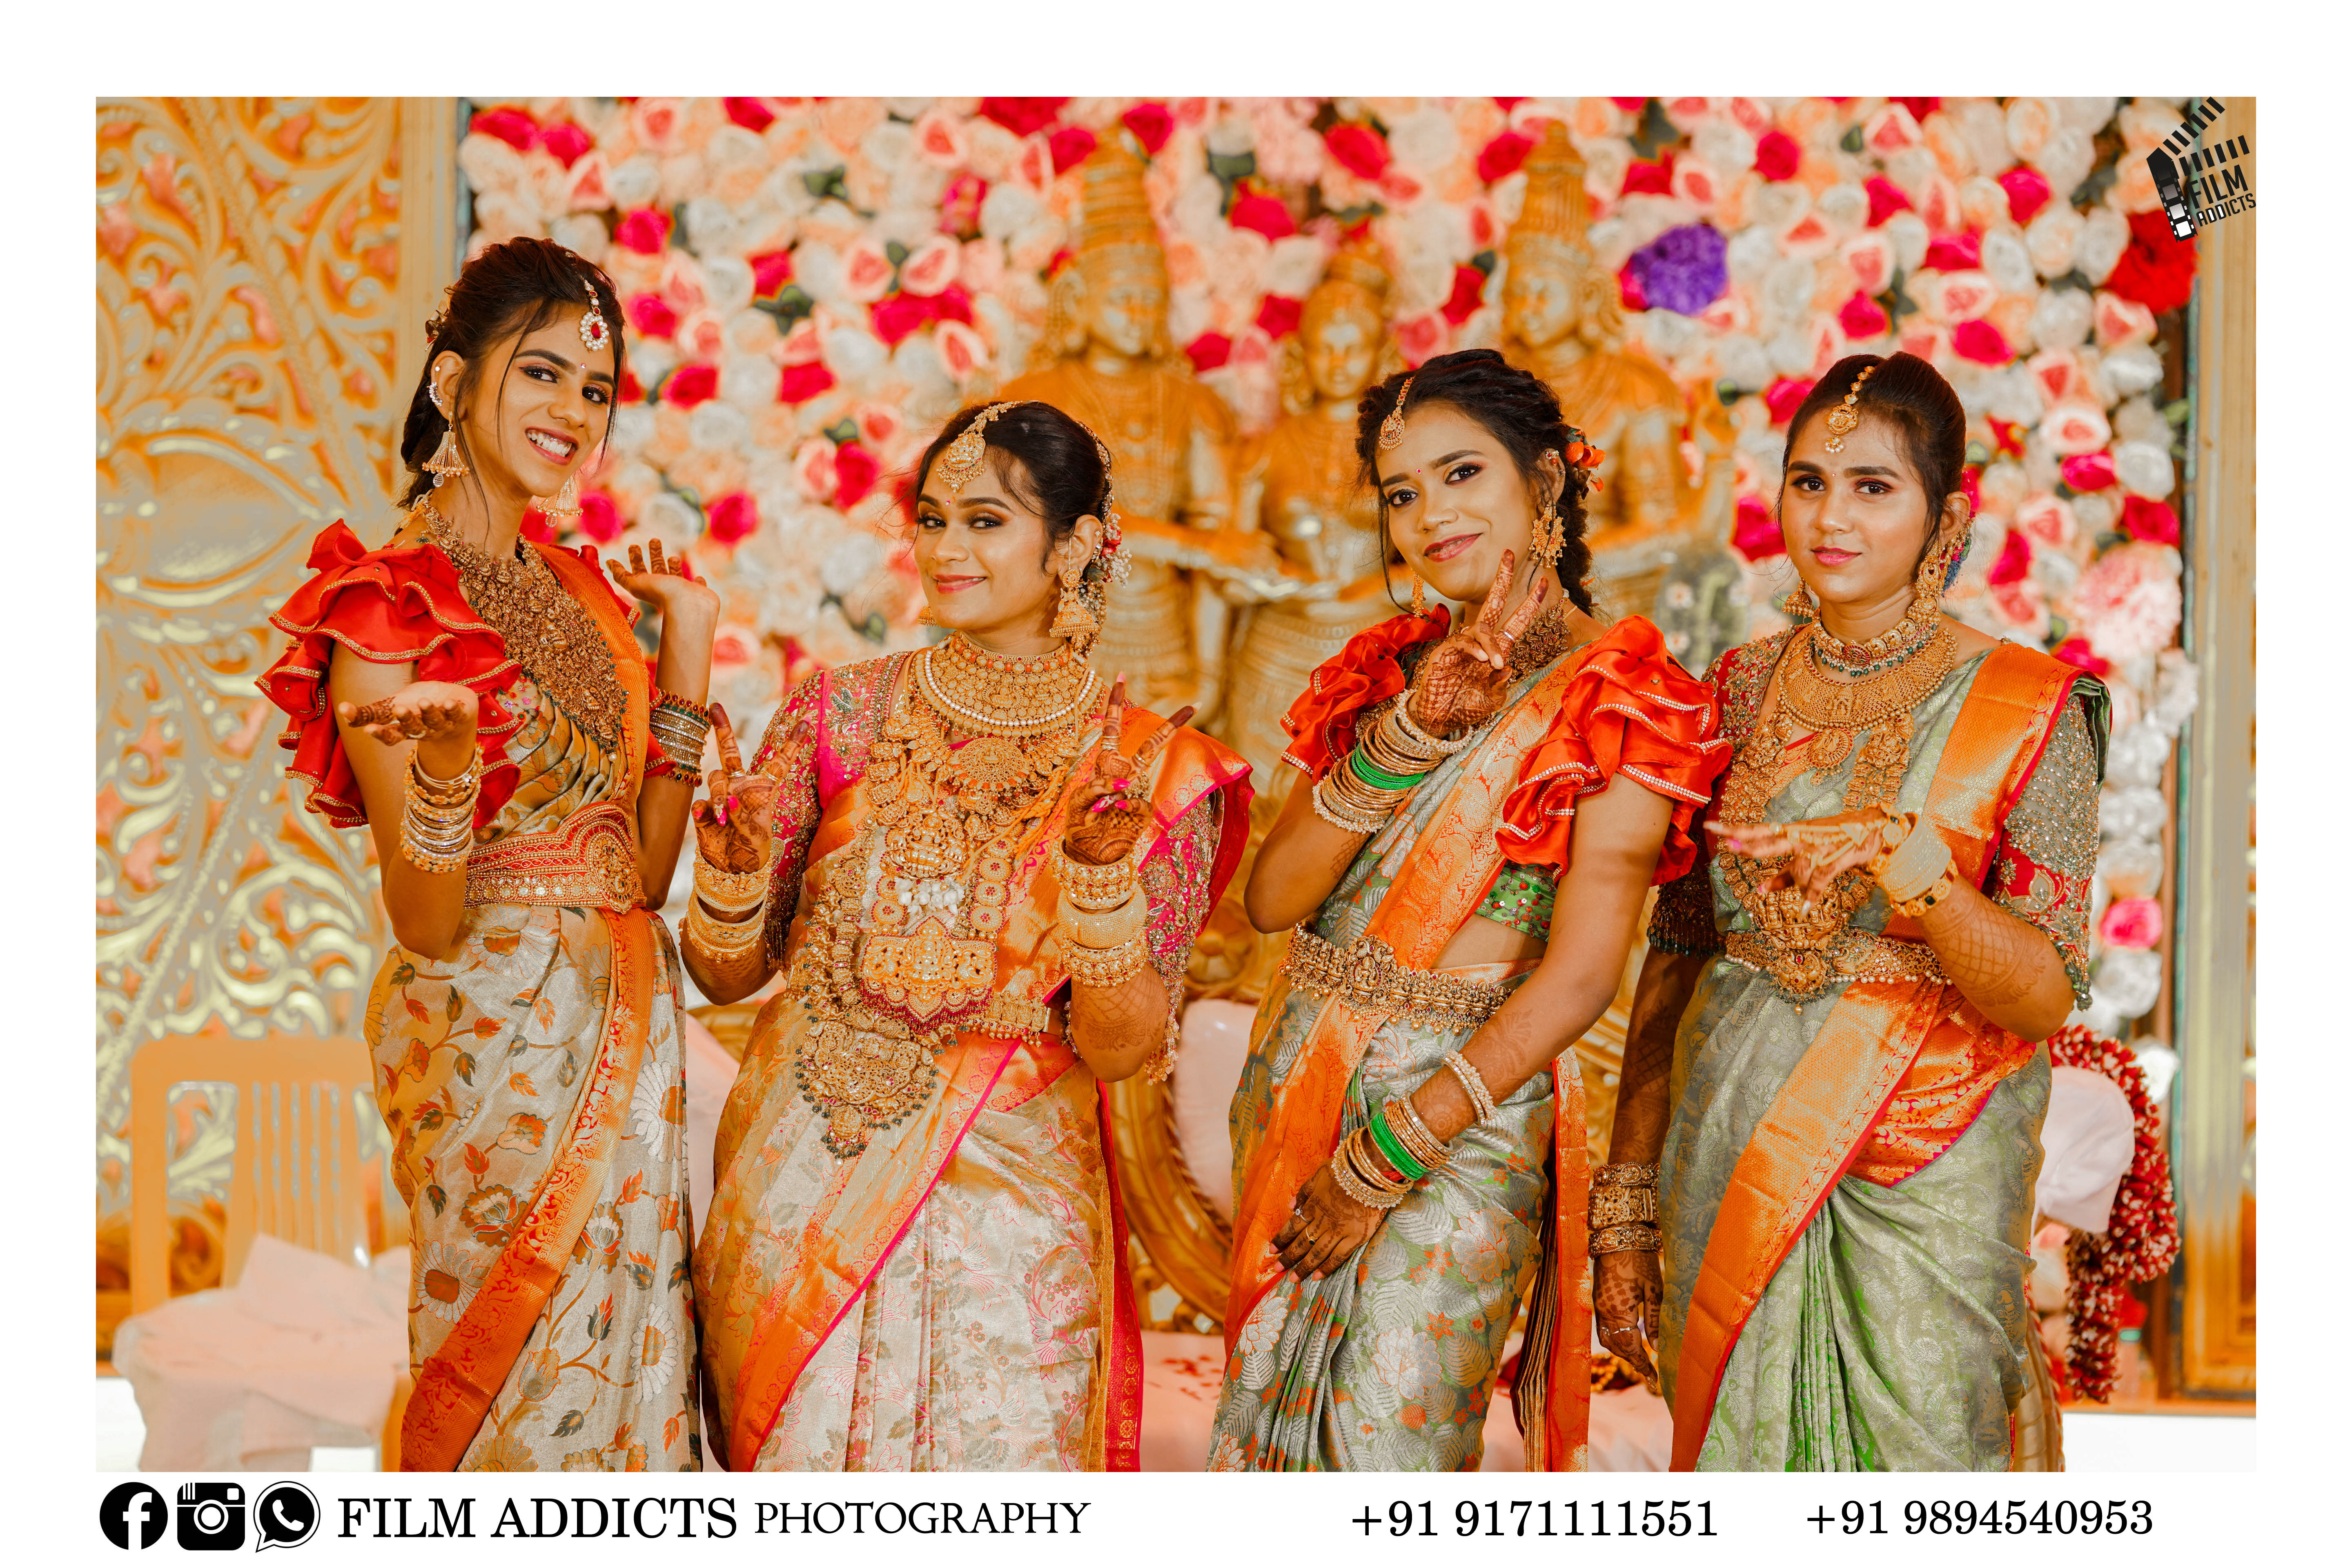 Best Candid Photographers in Trichy-FilmAddicts Photography,Best wedding photographers in Trichy,Best wedding photography in Trichy,Best candid photographers in Trichy,Best candid photography in Trichy,Best marriage photographers in Trichy,Best marriage photography in Trichy,Best photographers in Trichy,Best photography in Trichy,Best wedding candid photography in Trichy,Best wedding candid photographers in Trichy,Best wedding video in Trichy,Best wedding videographers in Trichy,Best wedding videography in Trichy,Best candid videographers in Trichy,Best candid videography in Trichy,Best marriage videographers in Trichy,Best marriage videography in Trichy,Best videographers in Trichy,Best videography in Trichy,Best wedding candid videography in Trichy,Best wedding candid videographers in Trichy,Best helicam operators in Trichy,Best drone operators in Trichy,Best wedding studio in Trichy,Best professional photographers in Trichy,Best professional photography in Trichy,No.1 wedding photographers in Trichy,No.1 wedding photography in Trichy,Trichy wedding photographers,Trichy wedding photography,Trichy wedding videos,Best candid videos in Trichy,Best candid photos in Trichy,Best helicam operators photography in Trichy,Best helicam operator photographers in Trichy,Best outdoor videography in Trichy,Best professional wedding photography in Trichy,Best outdoor photography in Trichy,Best outdoor photographers in Trichy,Best drone operators photographers in Trichy,Best wedding candid videography in Trichy,tamilnadu wedding photography, tamilnadu.